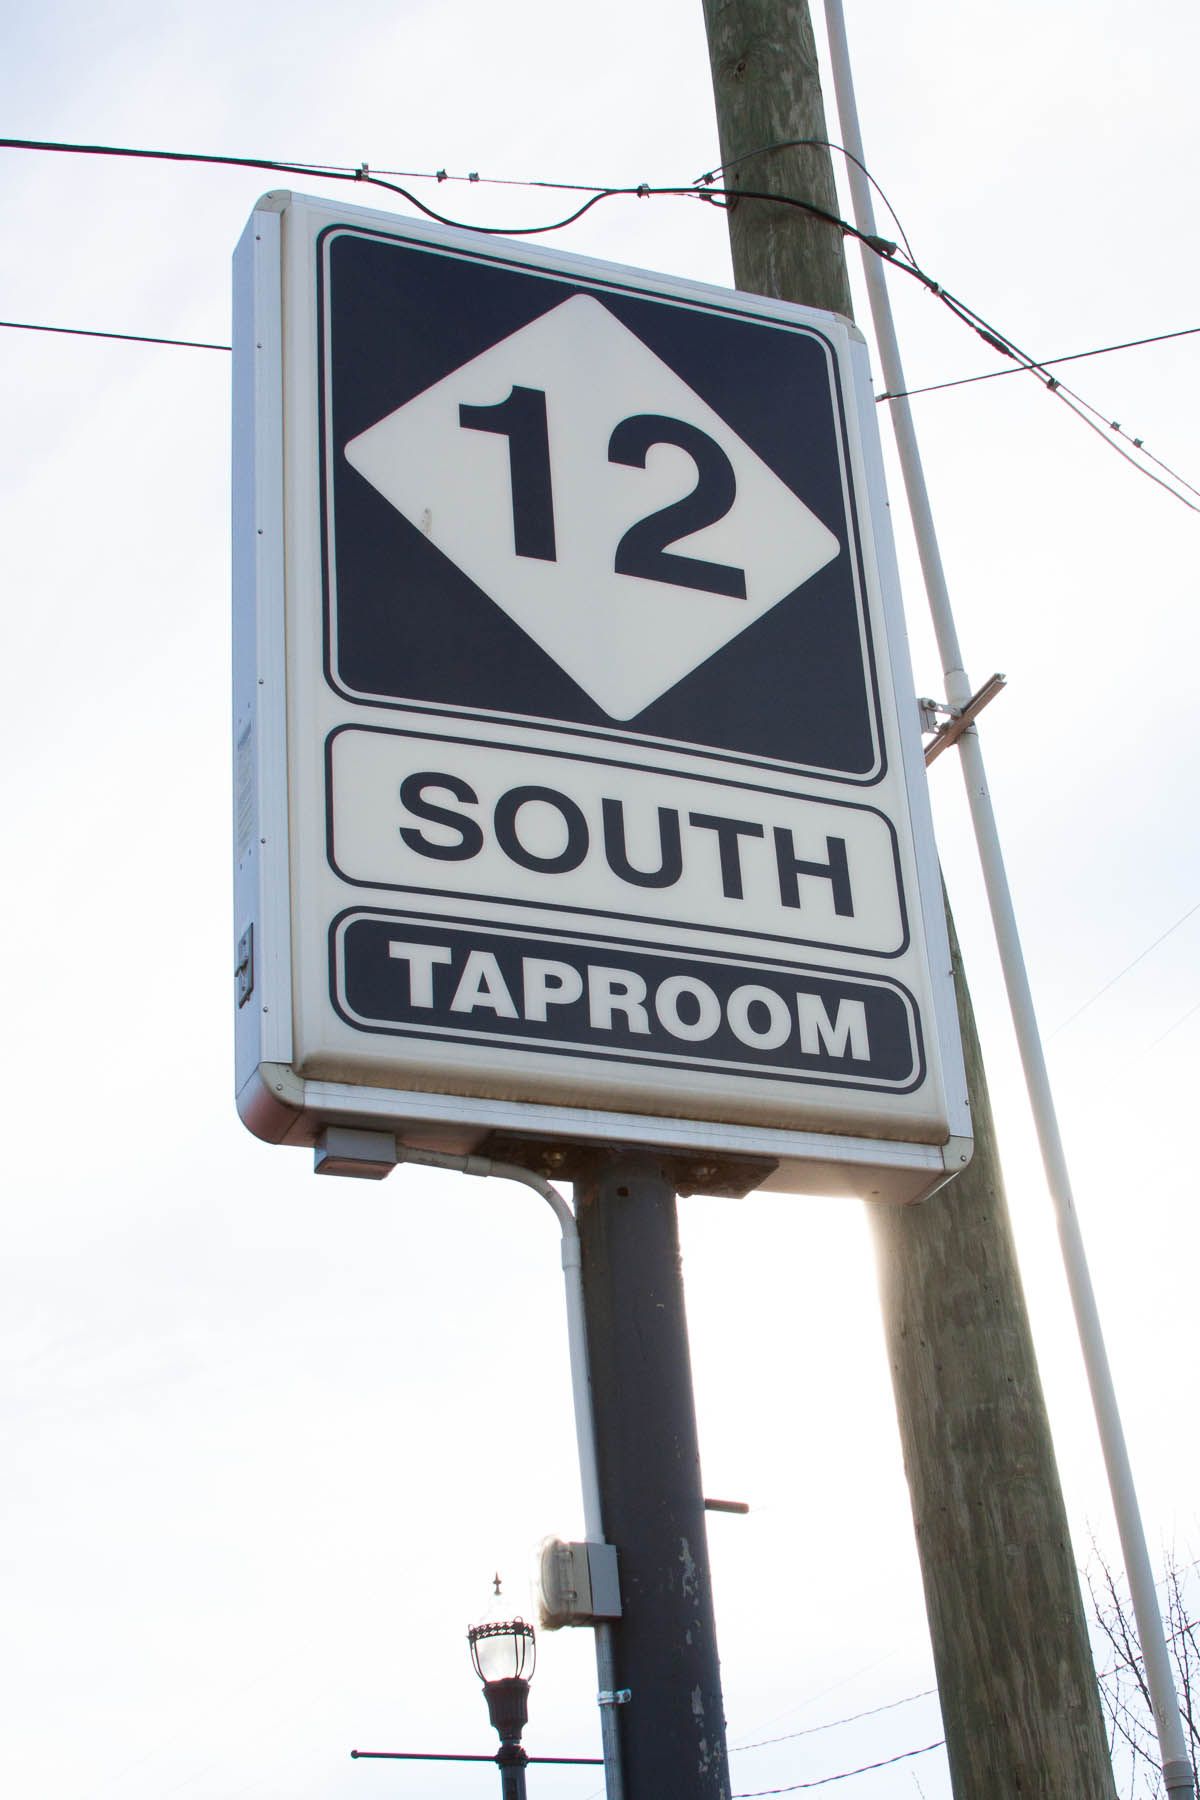 12South Taproom